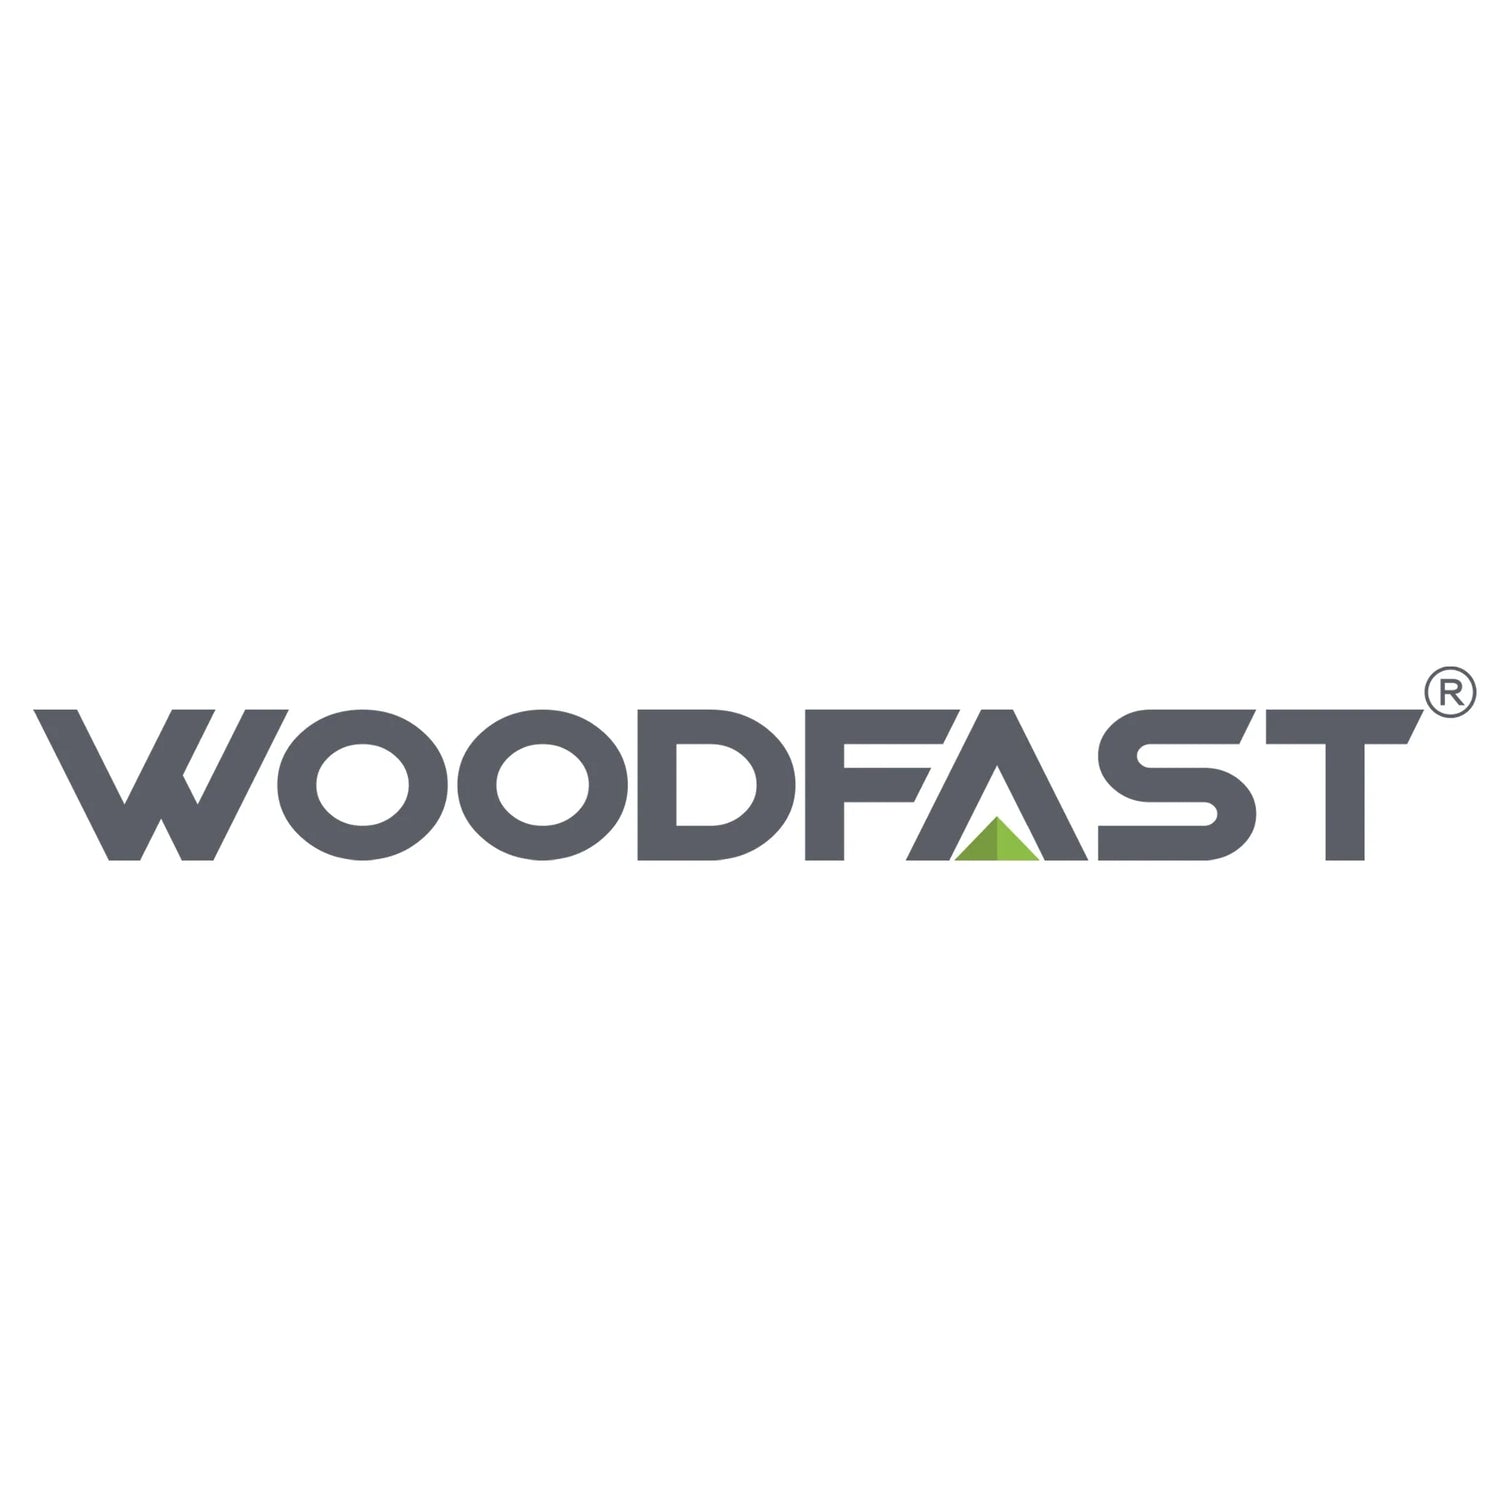 WHO IS WOODFAST?